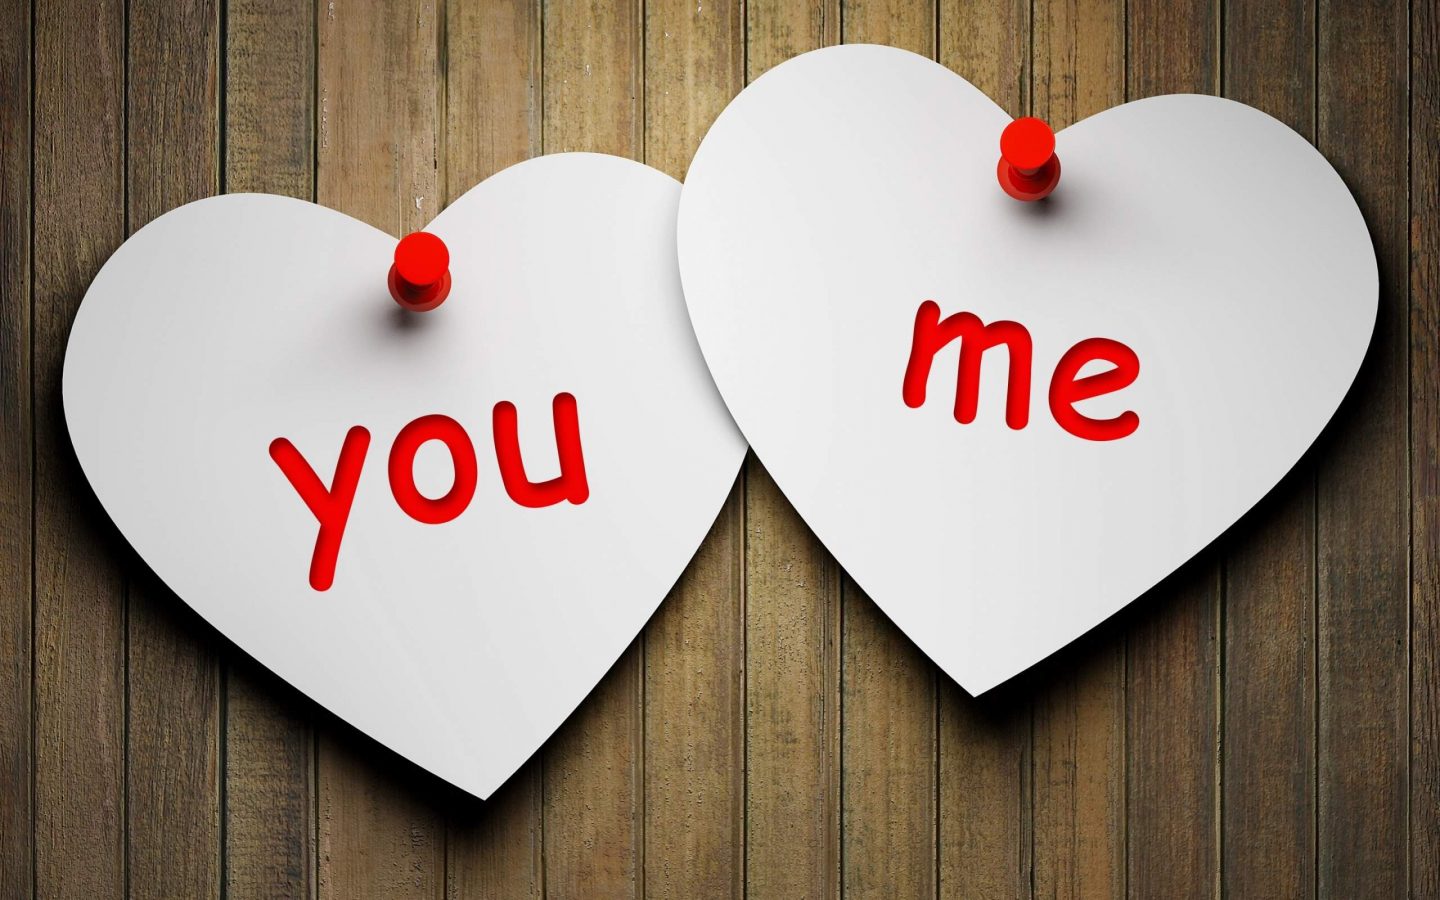 you and me wallpaper,heart,red,love,valentine's day,heart